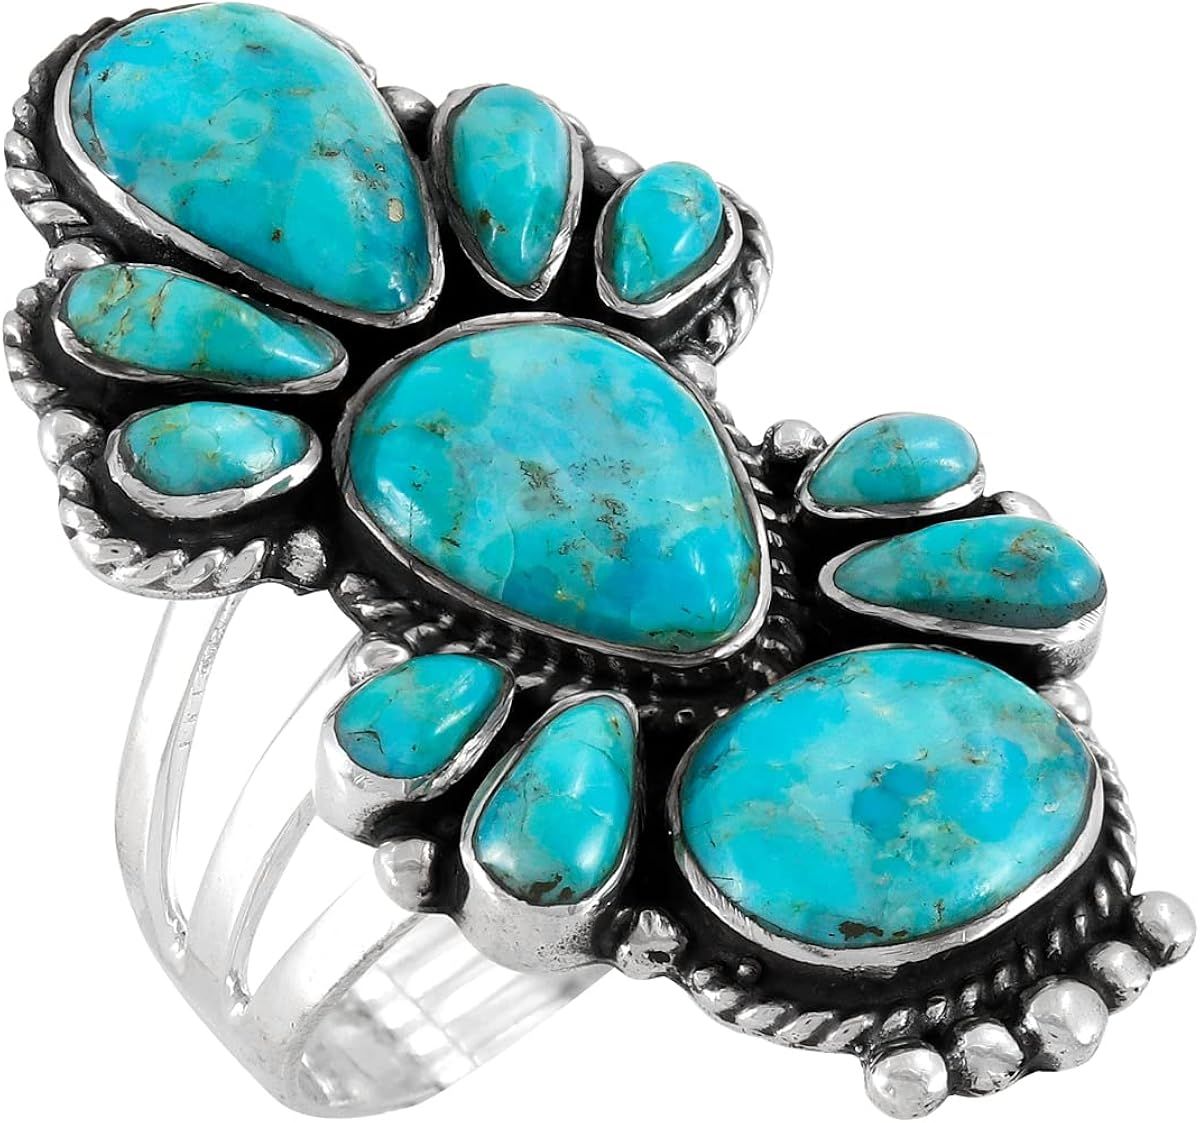 Turquoise Ring Sterling Silver 925 Genuine Gemstones Size 6 to 11 | Amazon (US)